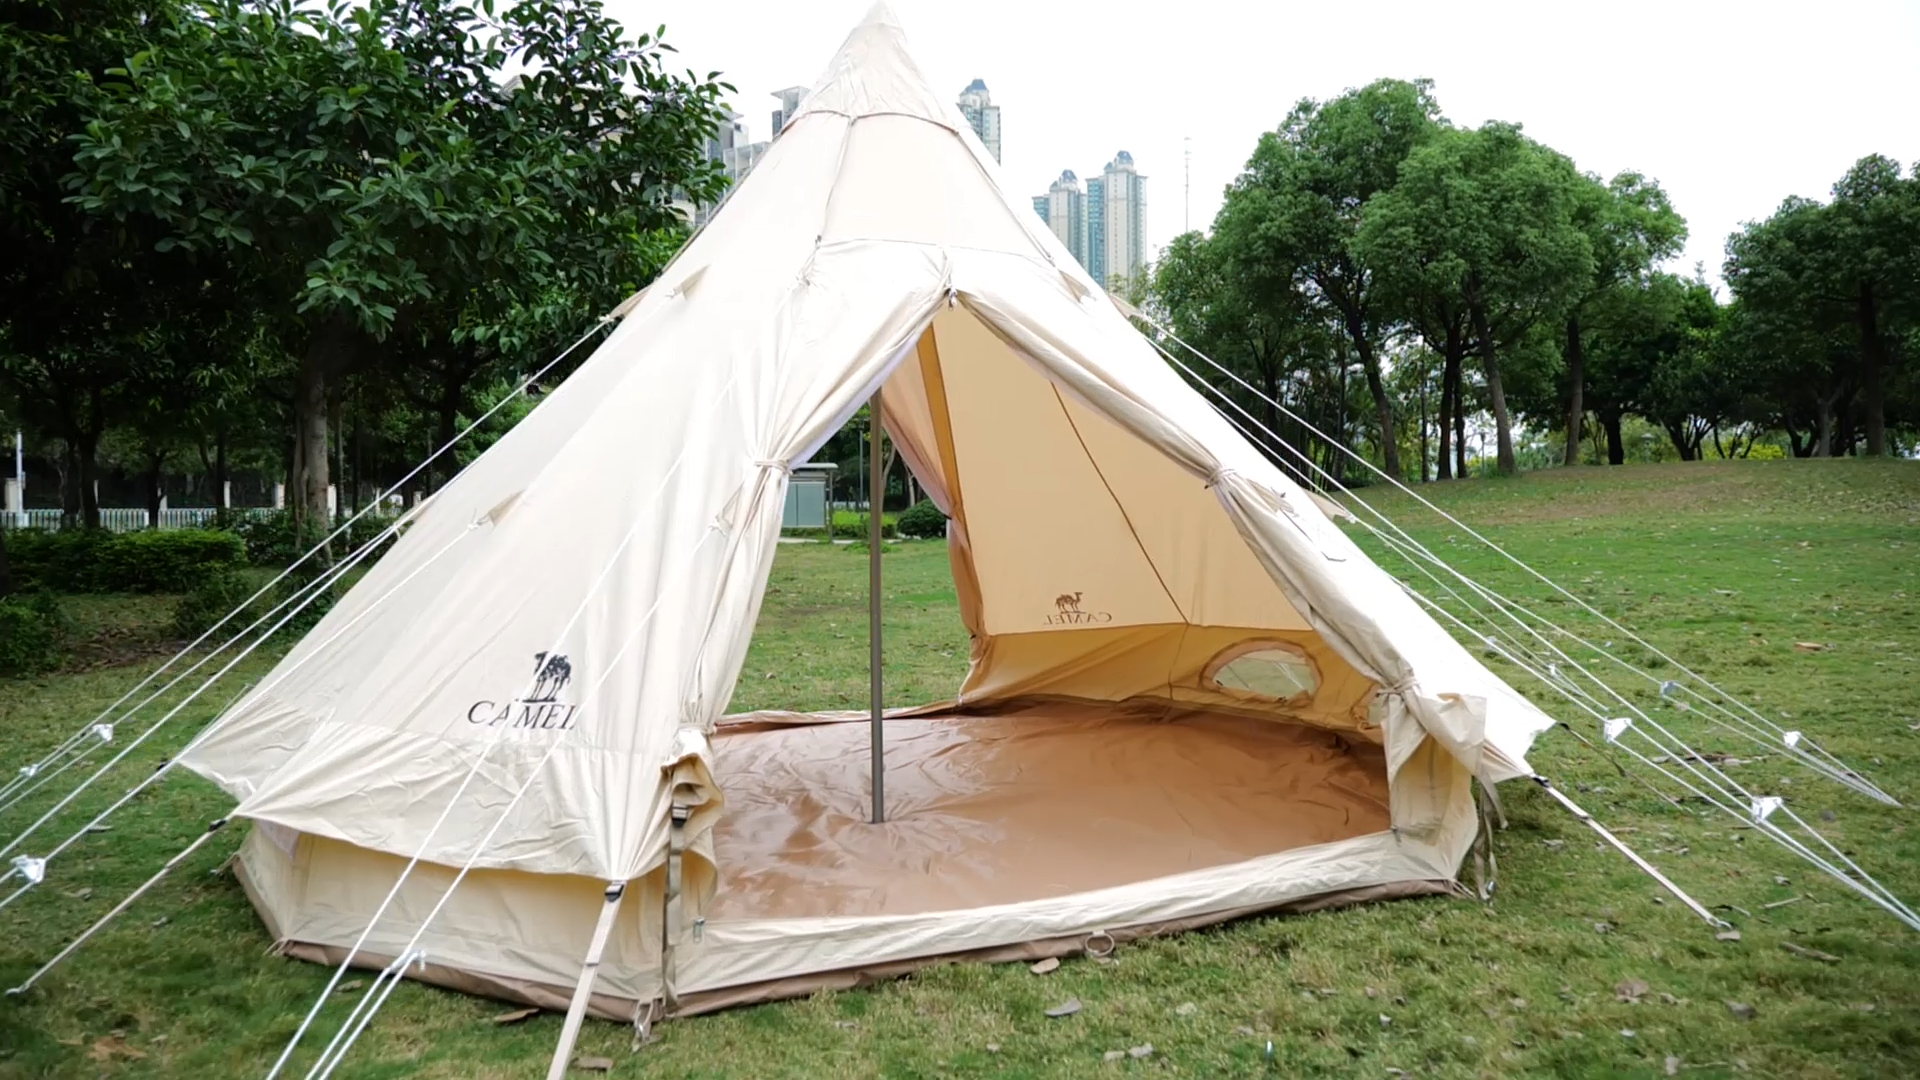 Camel 2-4 Persons grossistbomull Canvas Glamping Luxury Bell Tent Family Tent Luxury Tent Camp Outdoor1